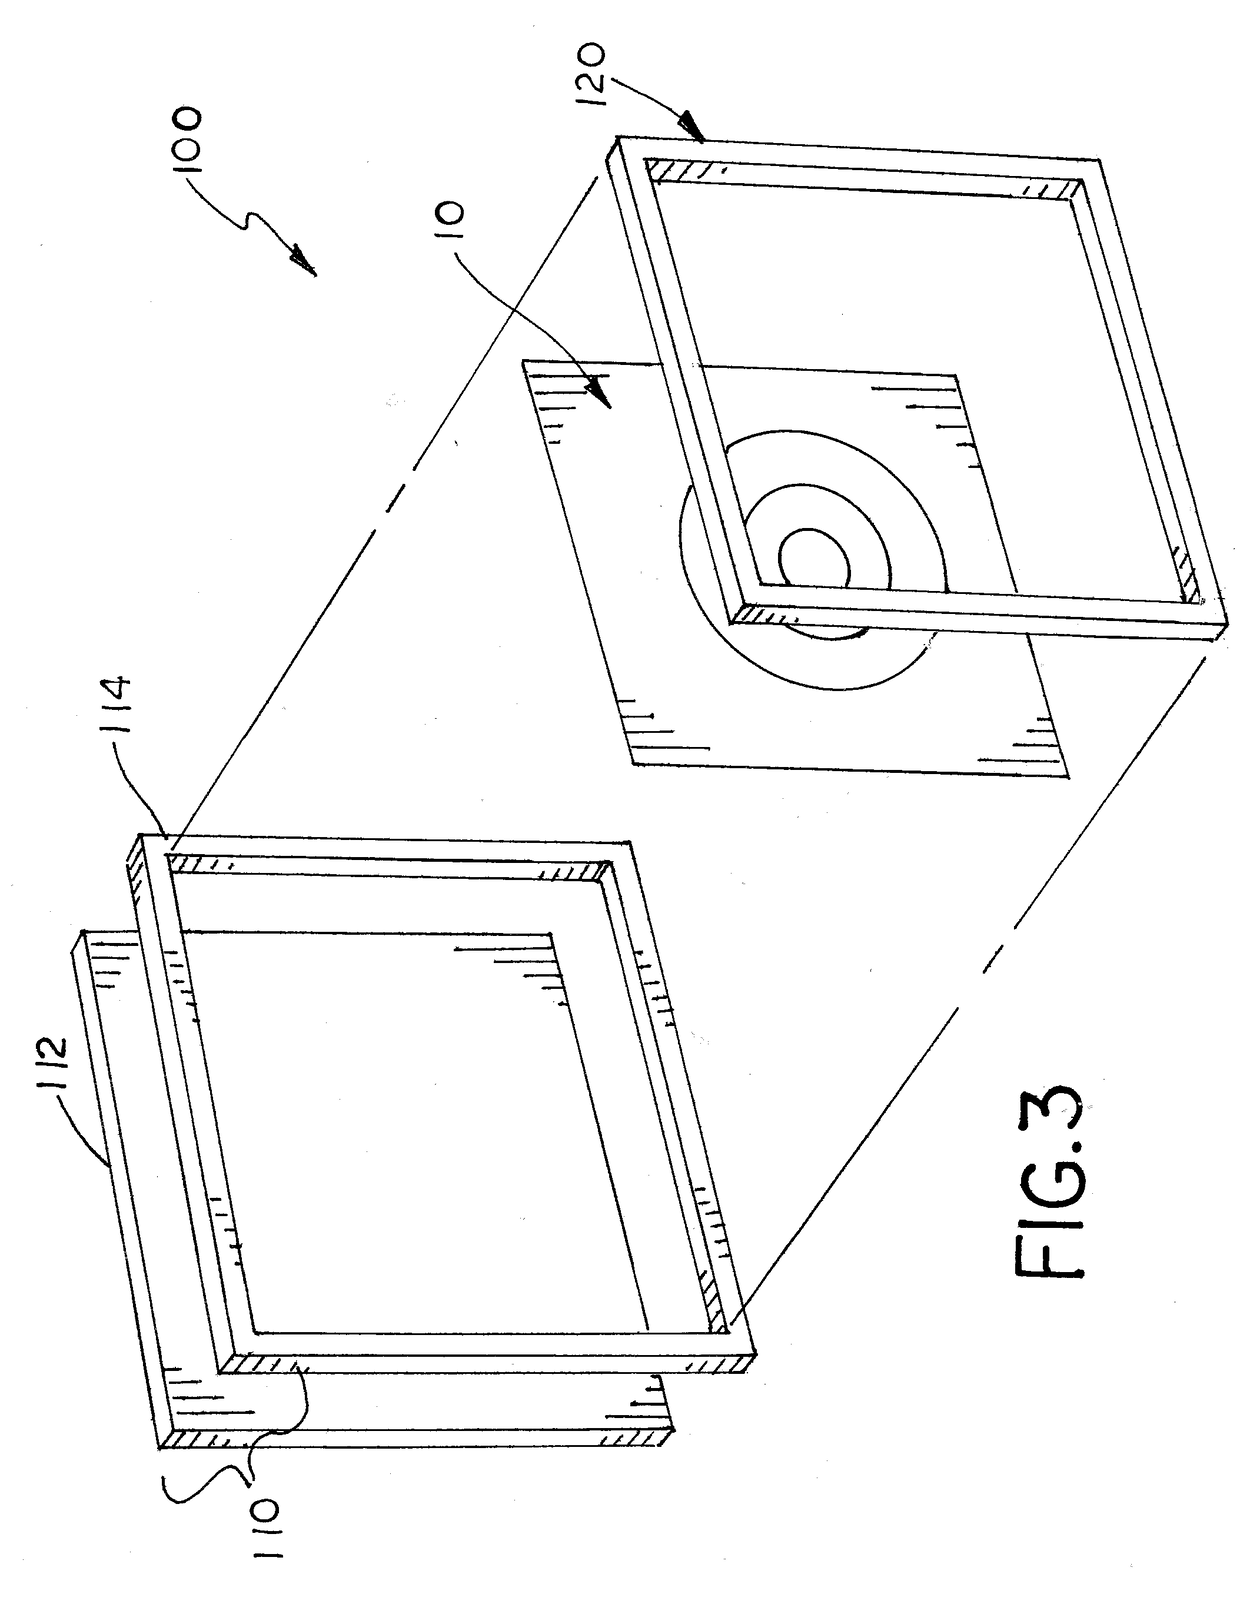 Ballistic picture frame for two dimensional targets